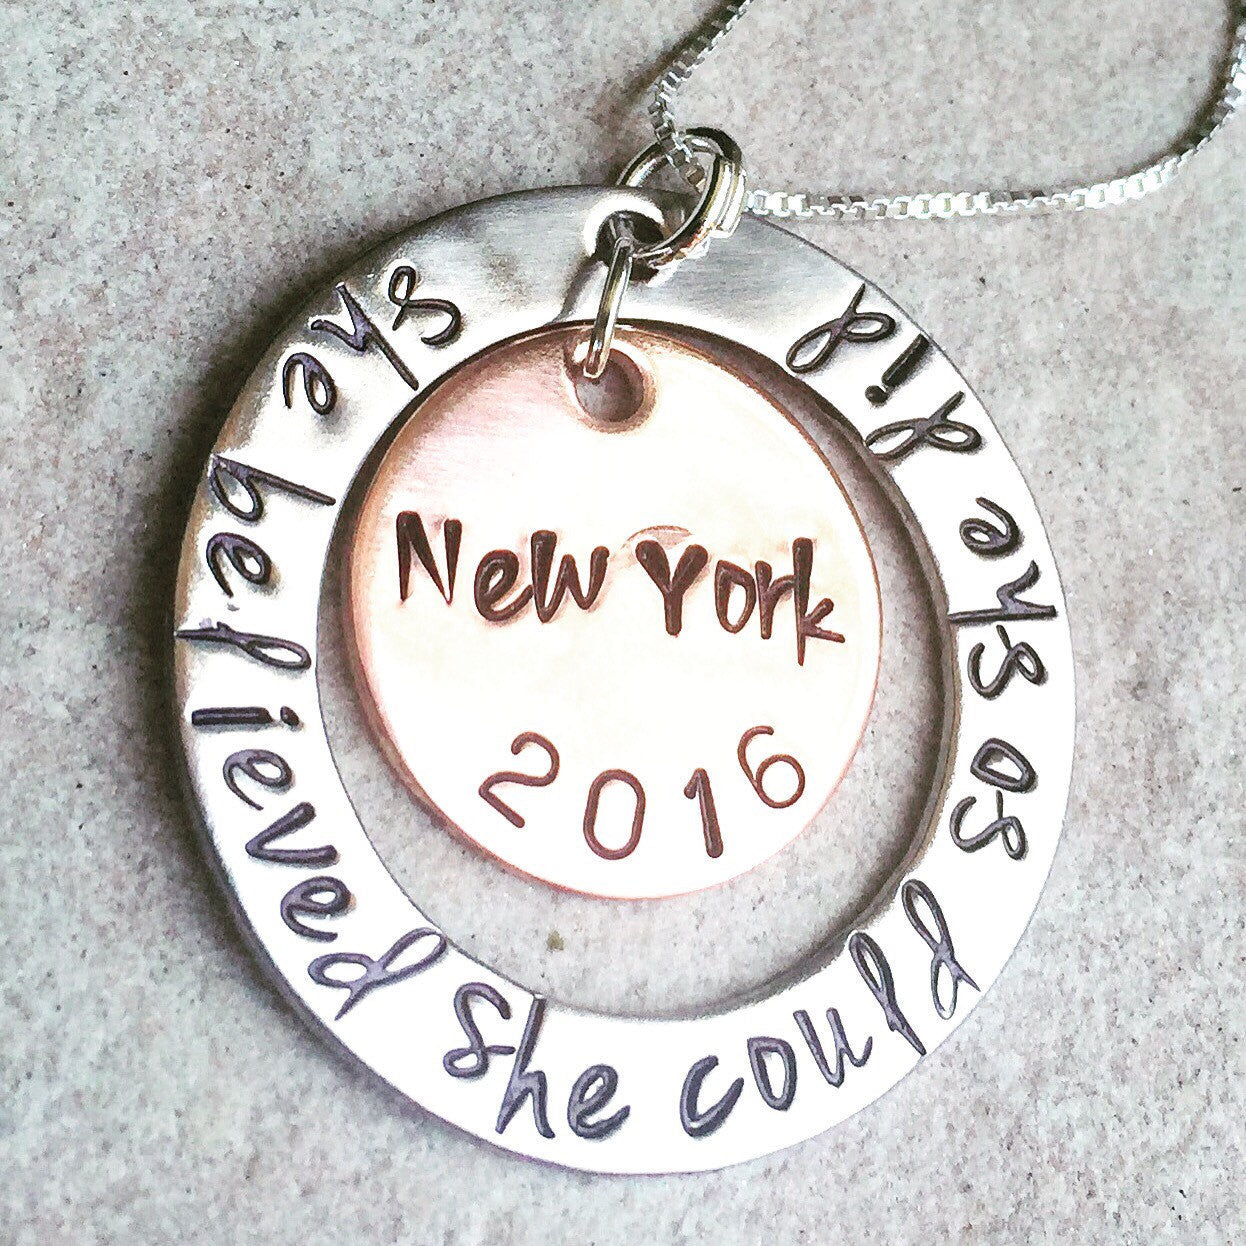 She Believed She Could So She Did Necklace - Natashaaloha, jewelry, bracelets, necklace, keychains, fishing lures, gifts for men, charms, personalized, 